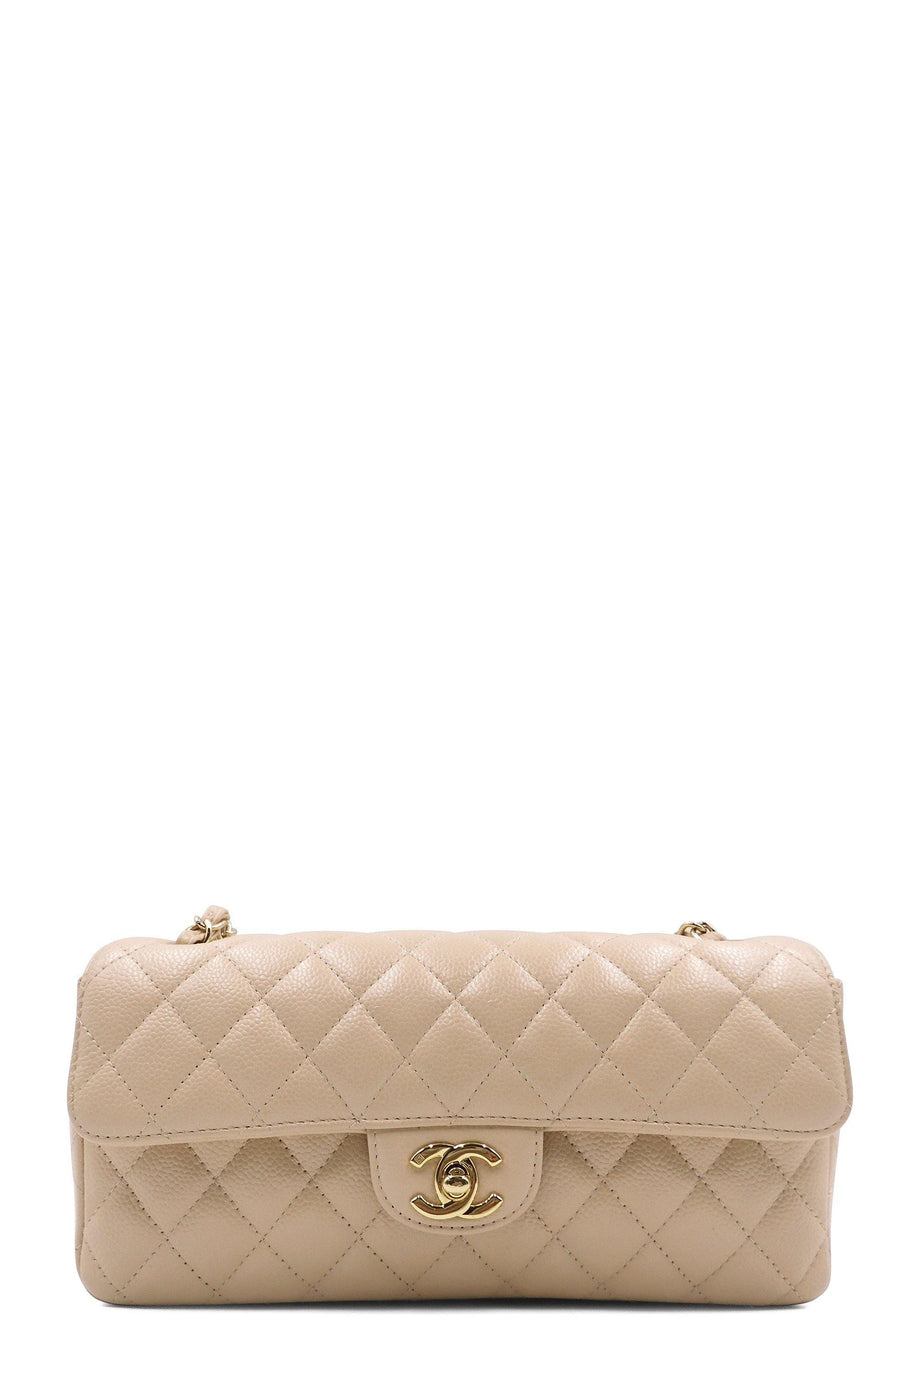 Quilted Caviar East West Flap Bag Beige with Gold Hardware